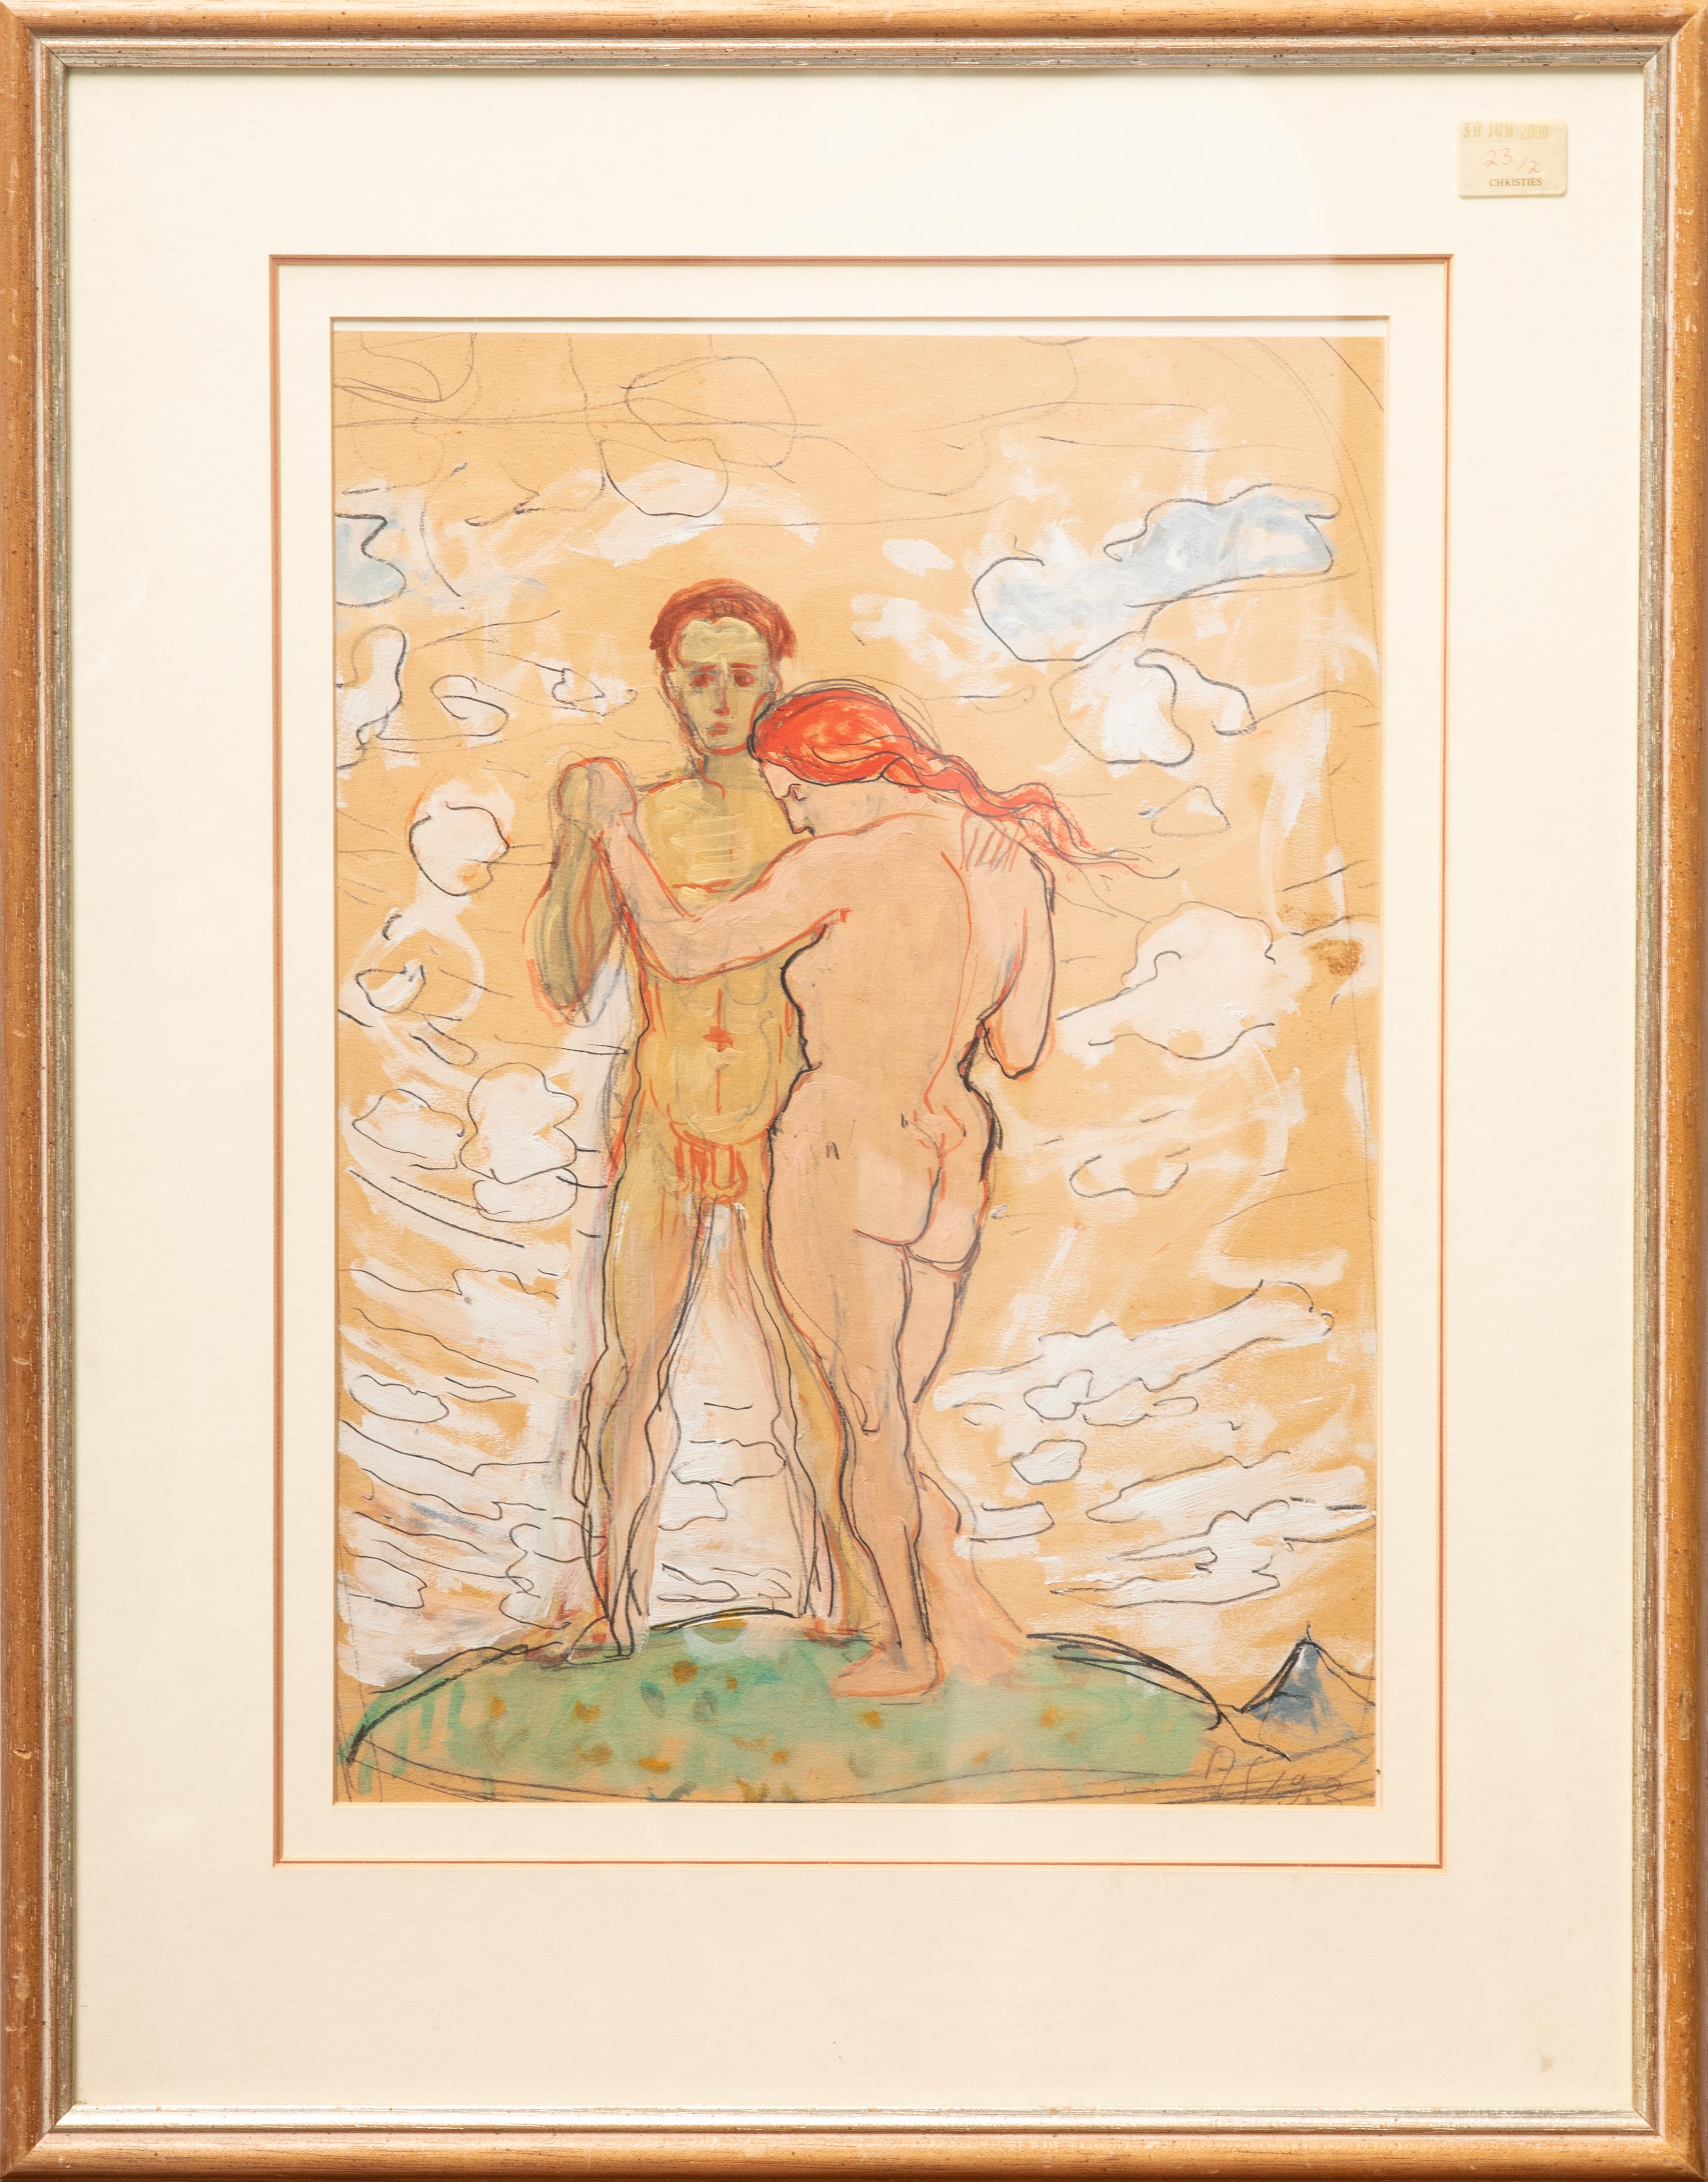 Albert Schmidt Adam and Eve Modernist watercolor and gouache on paper signed lower right. 12